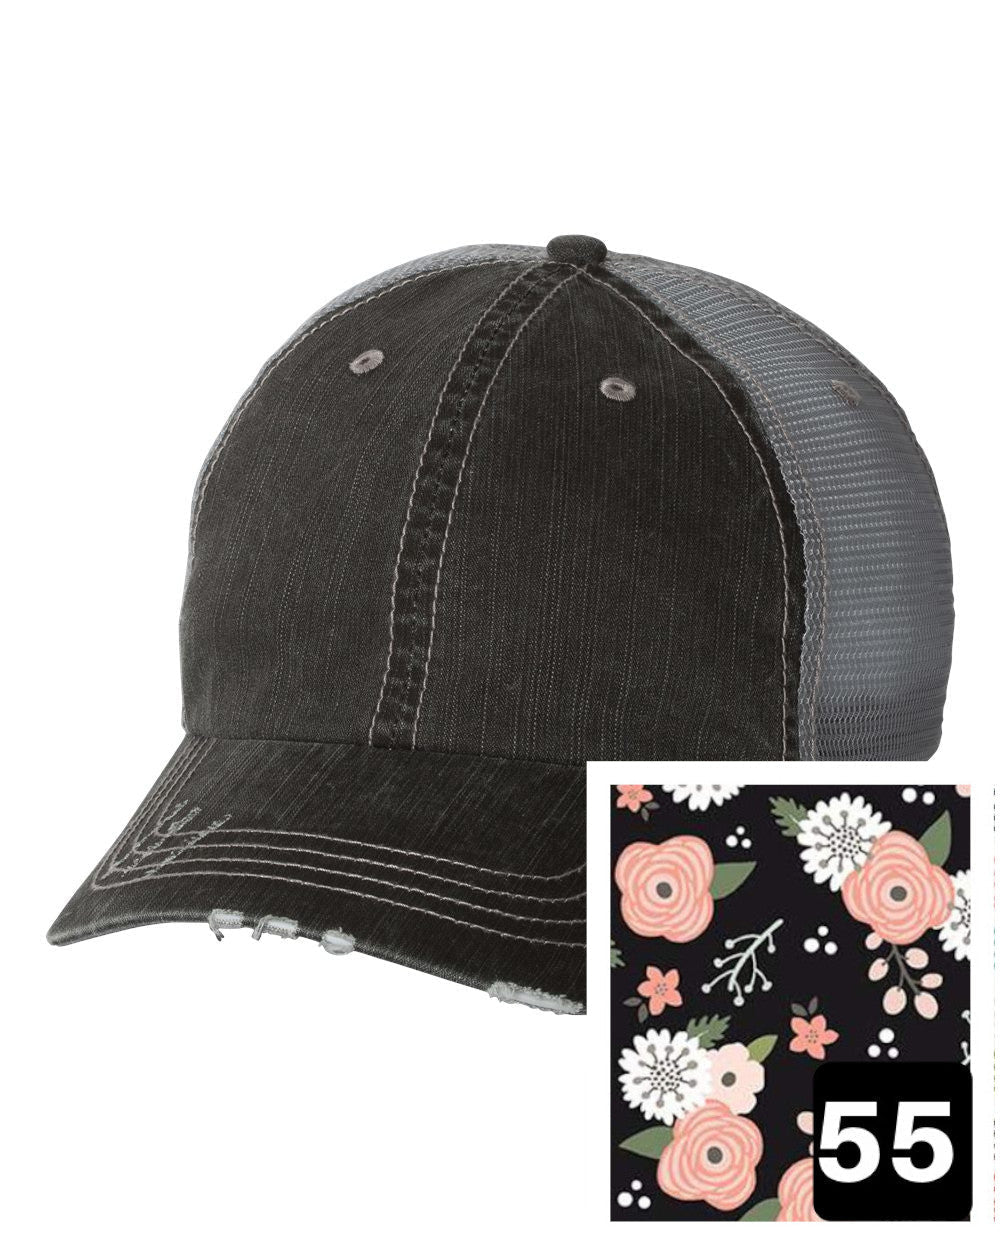 gray distressed trucker hat with petite floral on navy fabric state of New Jersey